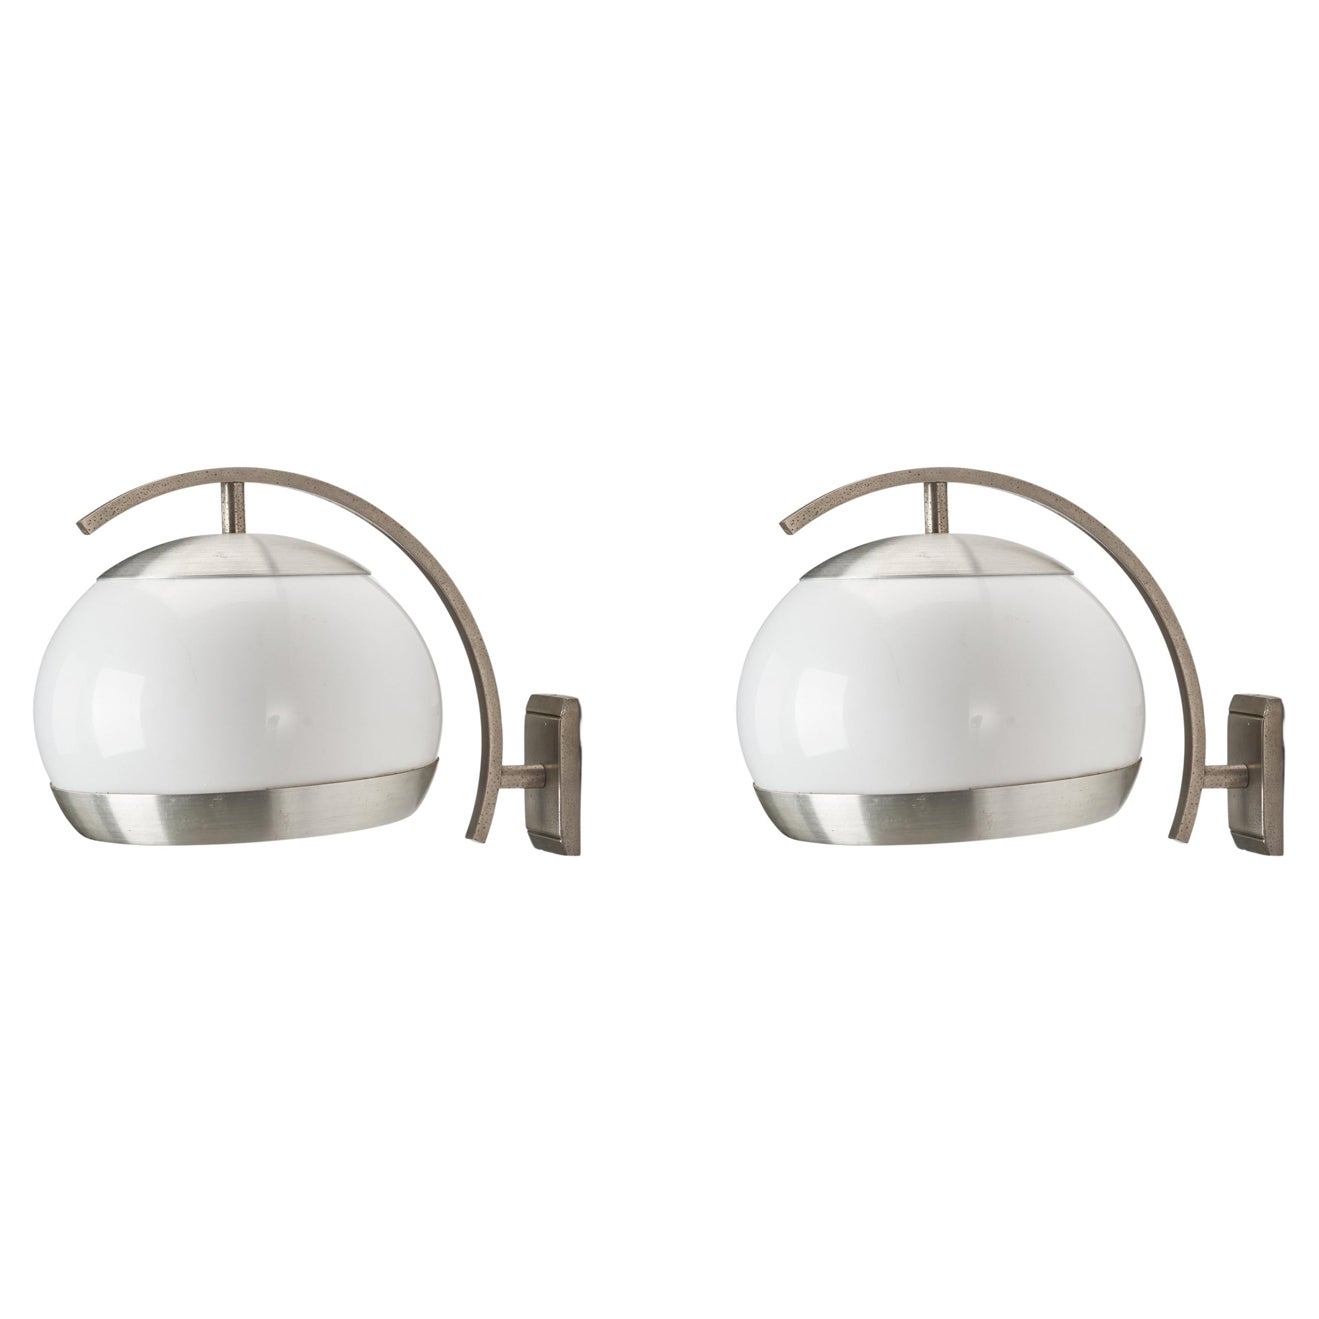 Stilux Milano, Wall Lights, Acrylic, Nickel-Plated Brass, Italy, 1960s For Sale